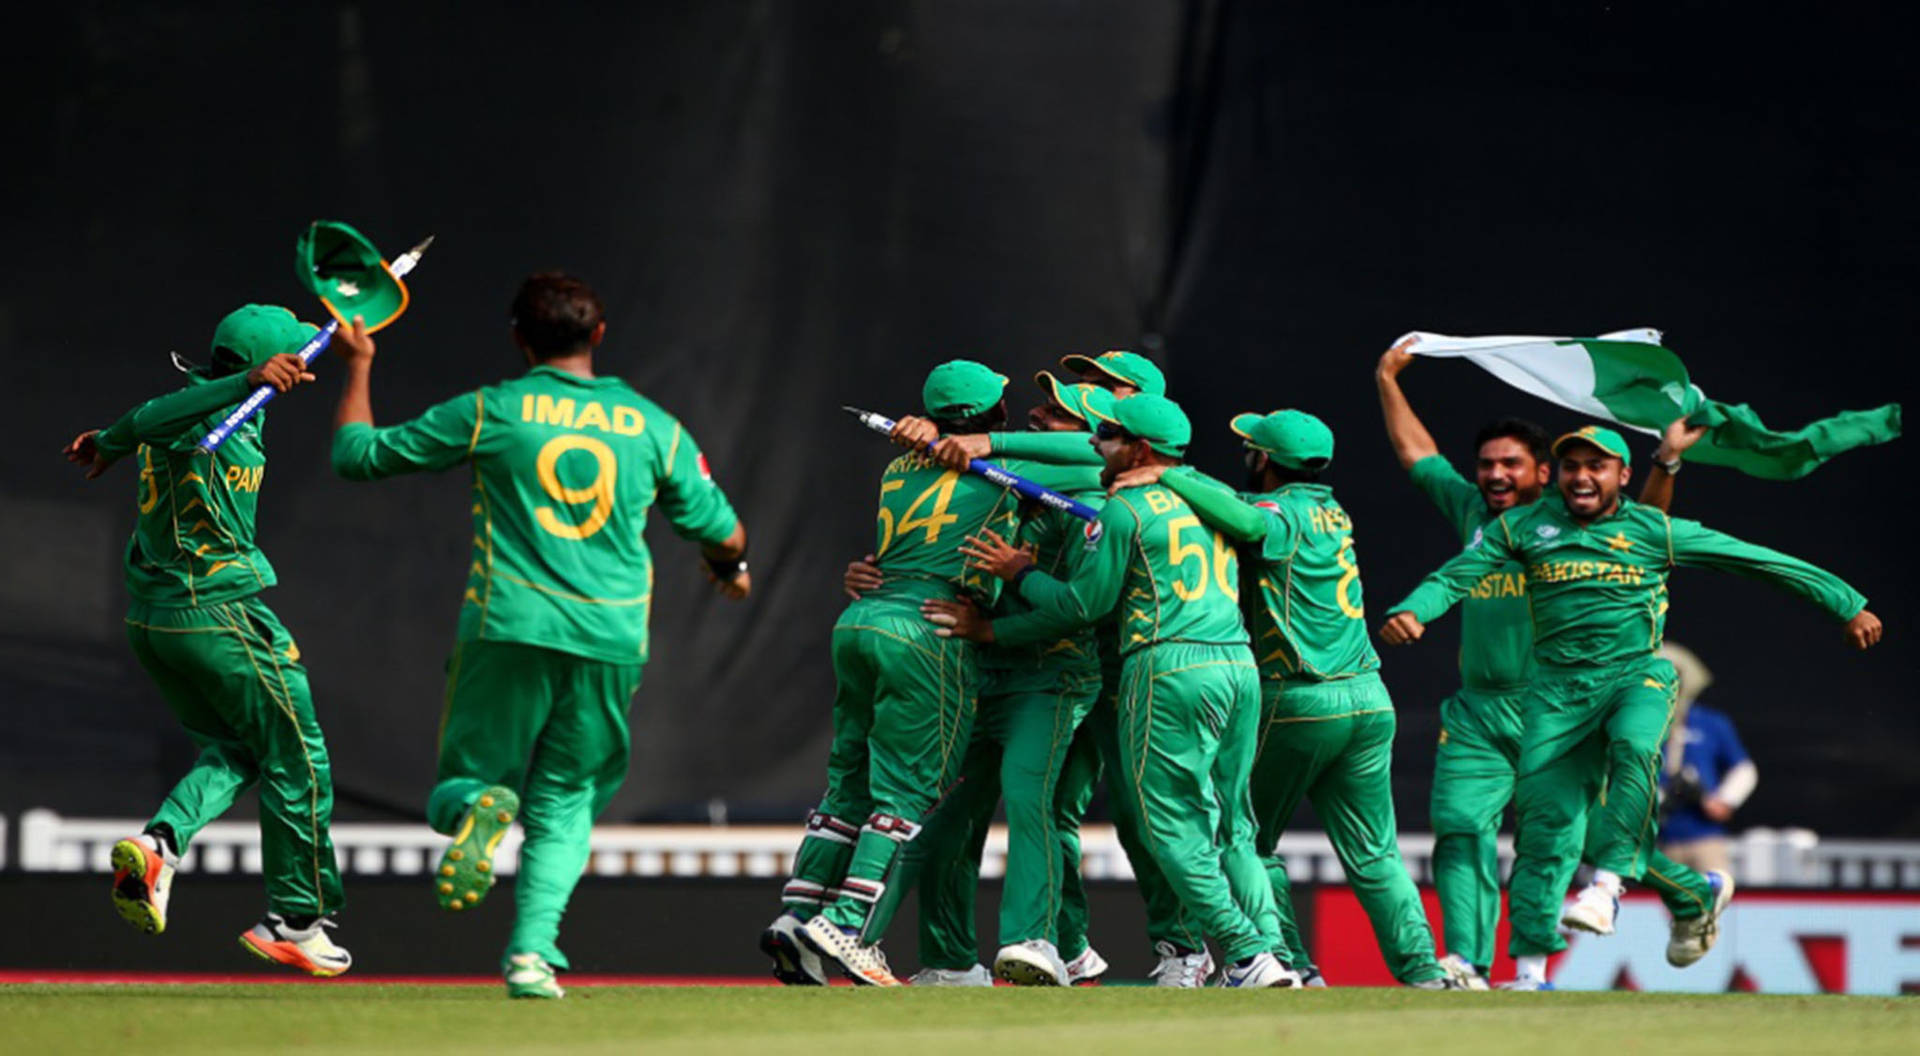 Captivating Moment Of The Pakistan Cricket Team Huddle In Victory